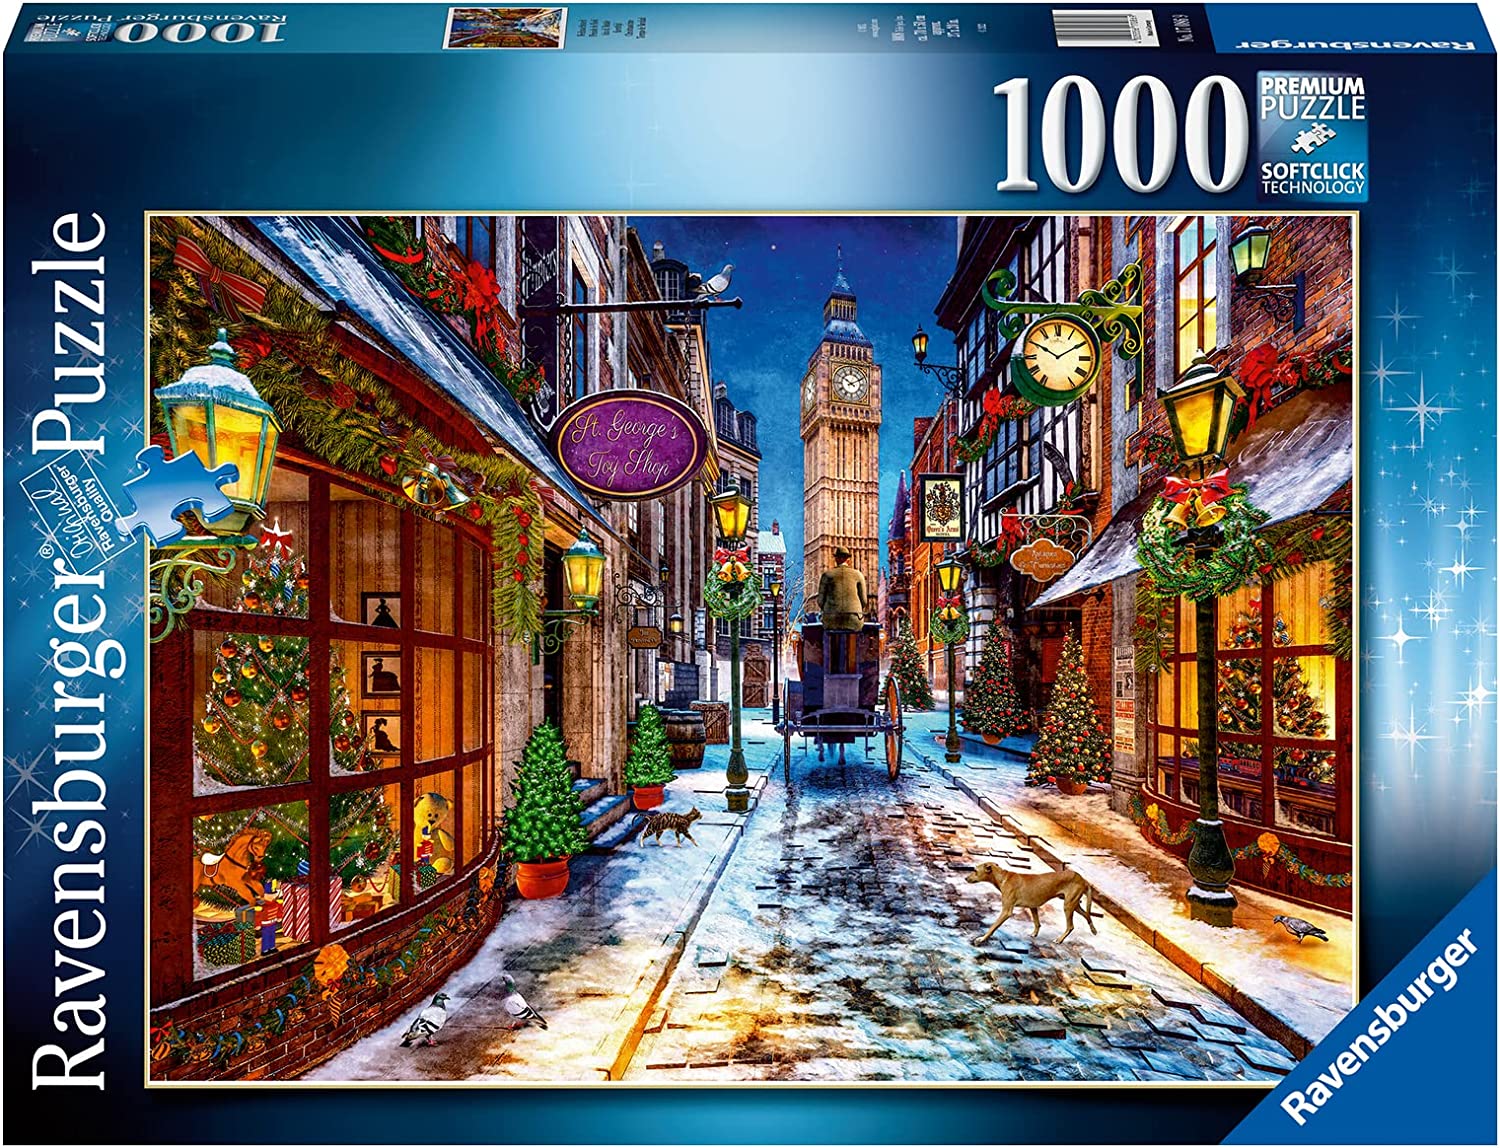 Hysterisch Groene bonen pensioen Ravensburger Christmastime 1000 Piece Puzzle – The Puzzle Collections